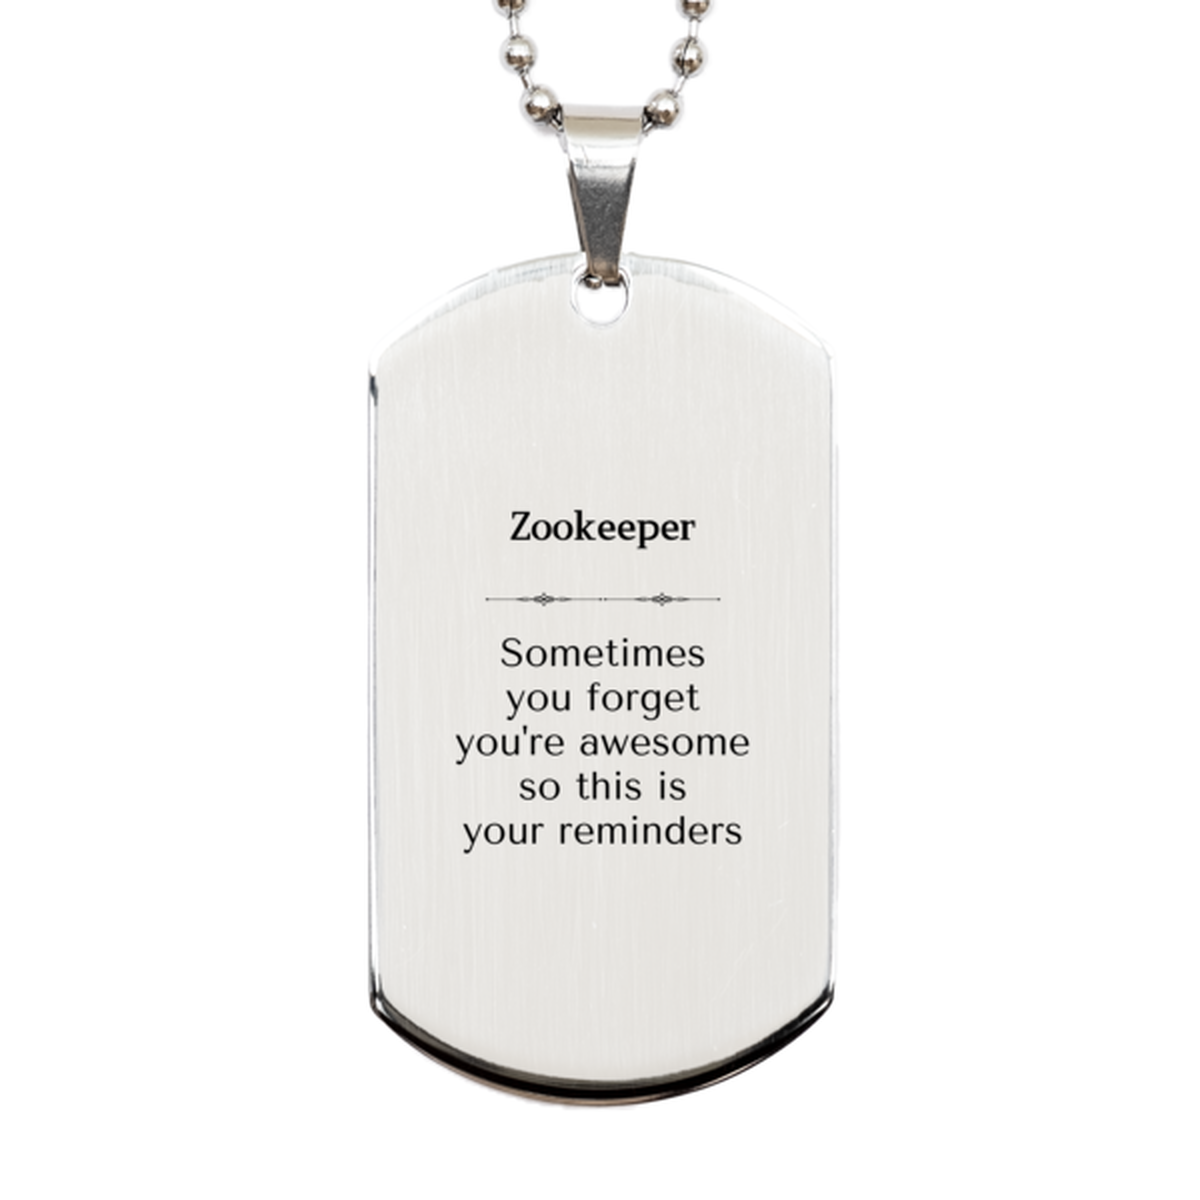 Sentimental Zookeeper Silver Dog Tag, Zookeeper Sometimes you forget you're awesome so this is your reminders, Graduation Christmas Birthday Gifts for Zookeeper, Men, Women, Coworkers